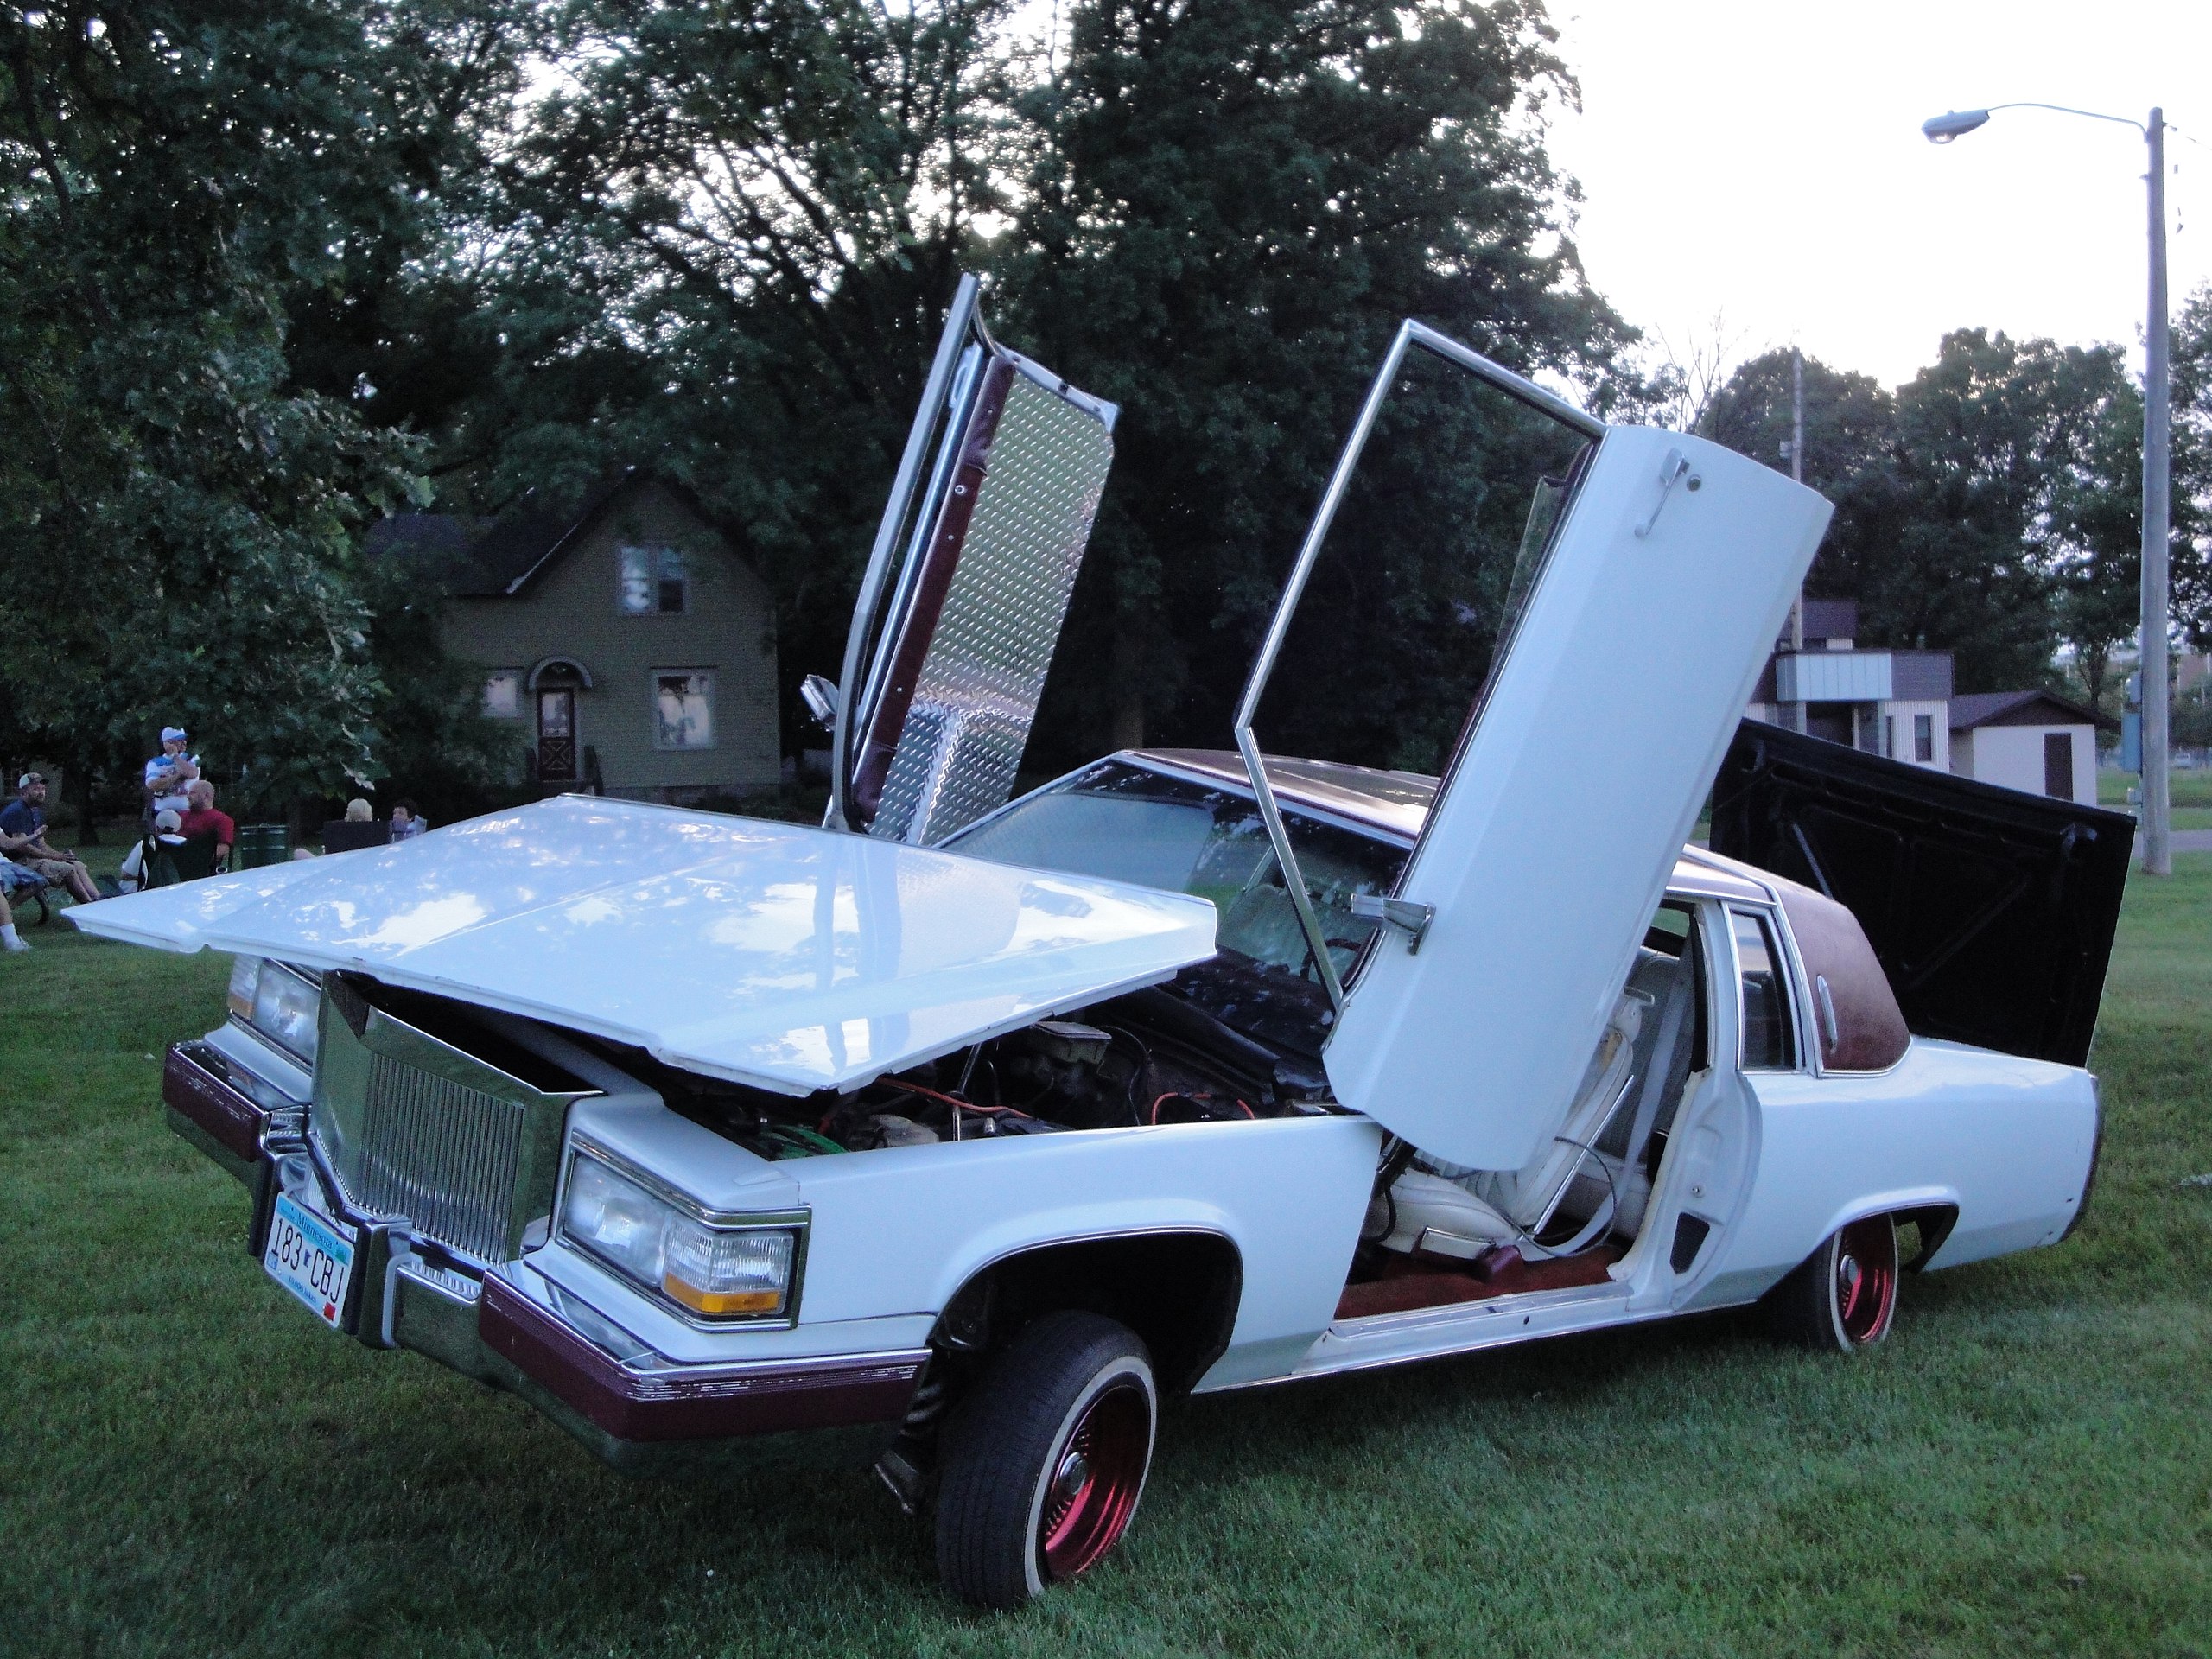 Restoring a 1983 Cadillac Coupe DeVille